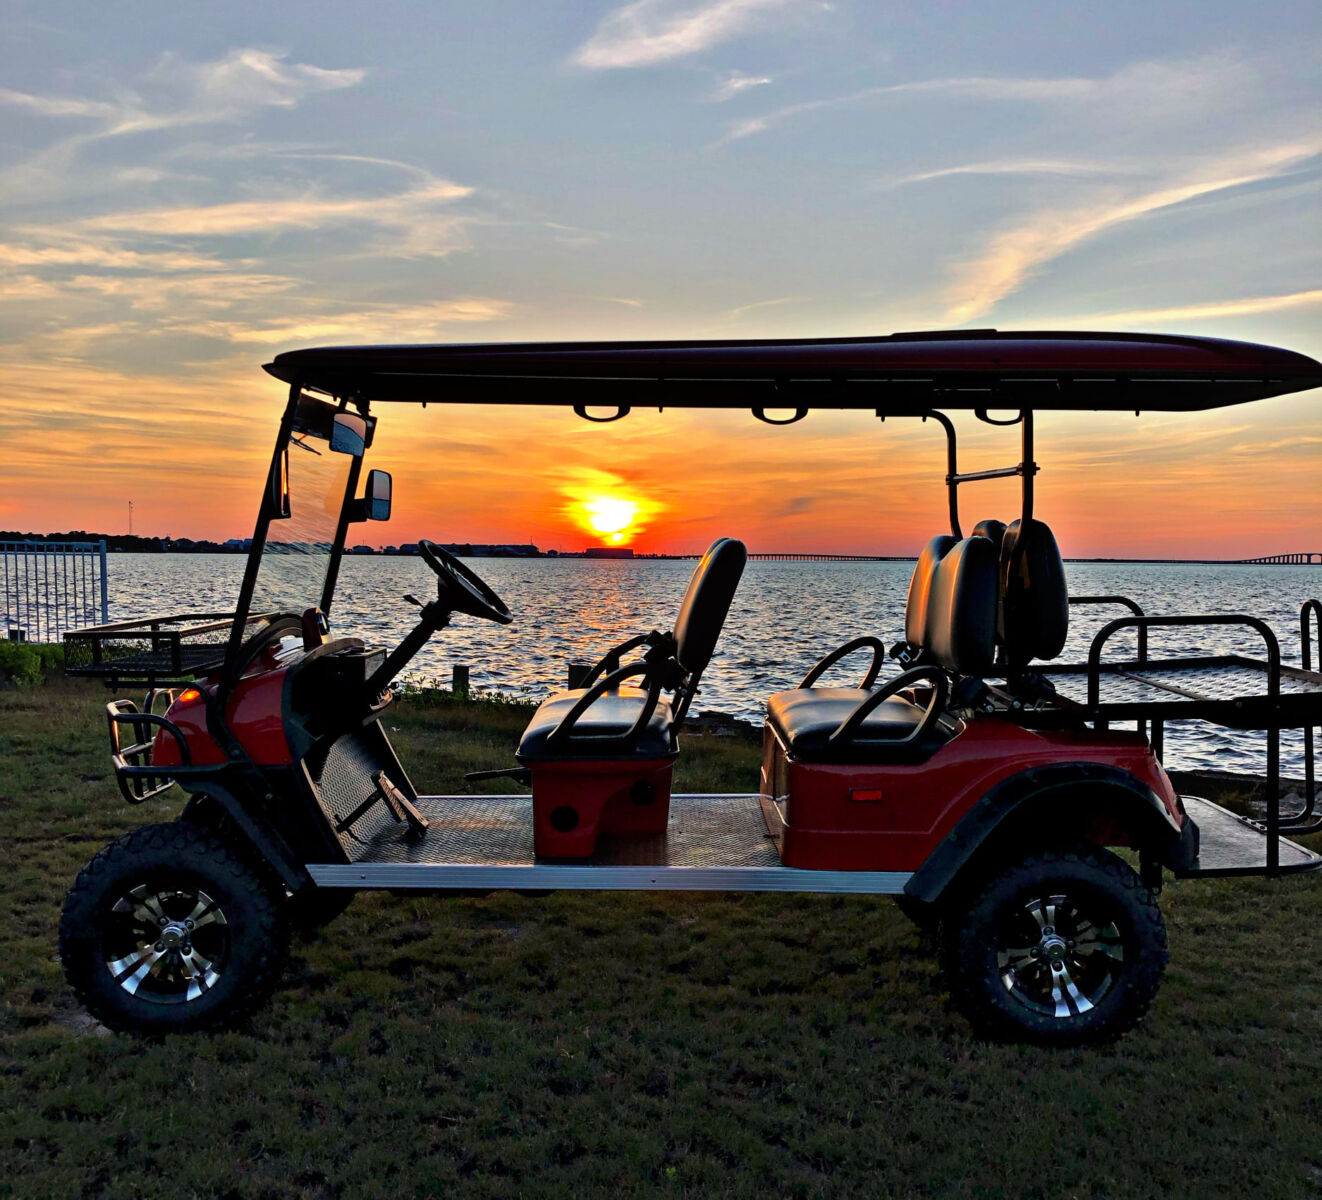 A golf cart in front of a water-front sunset.